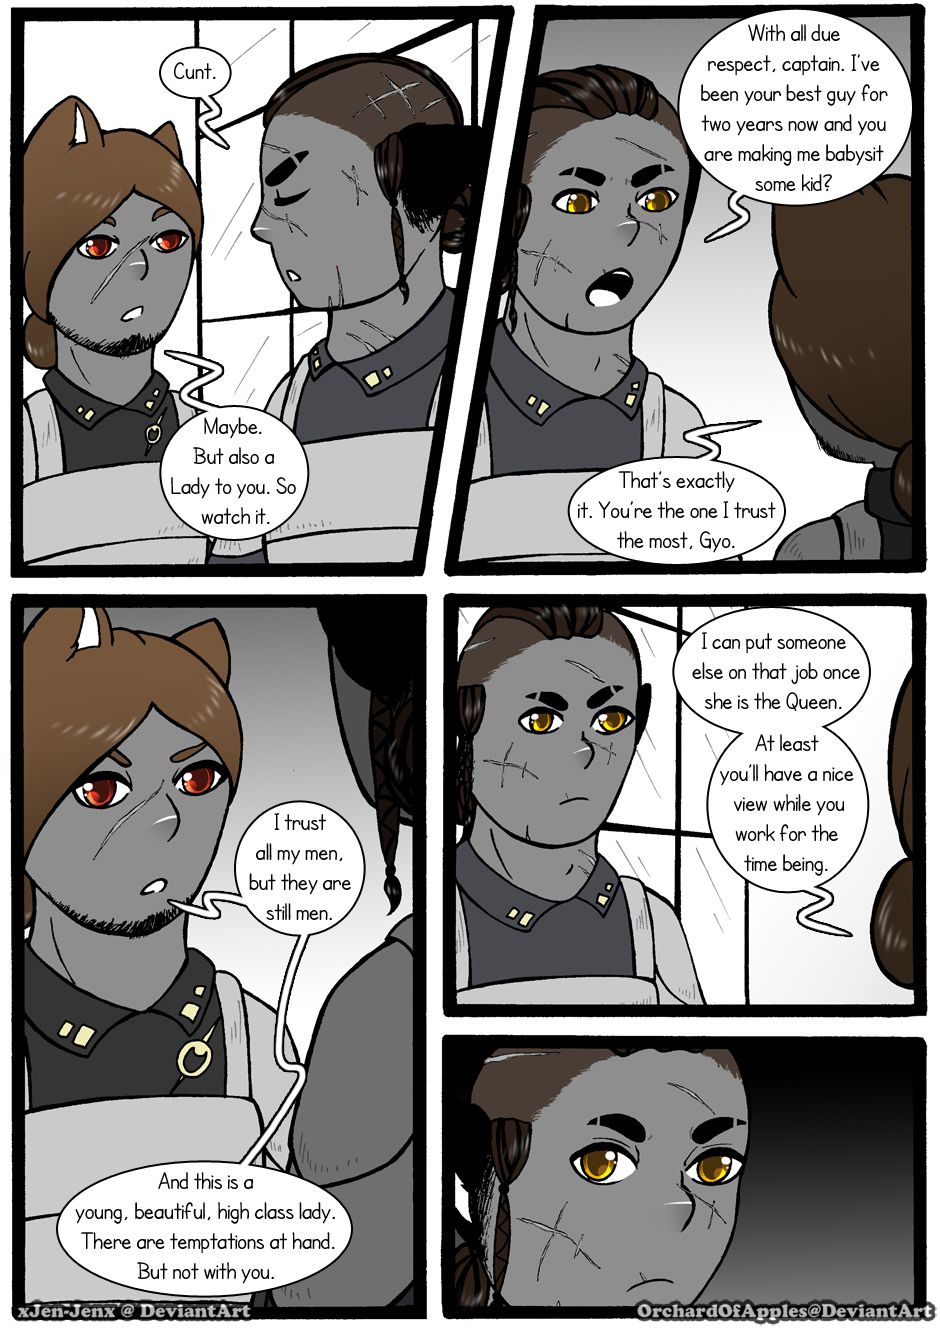 [Jeny-jen94] Between Kings and Queens [Ongoing] 246